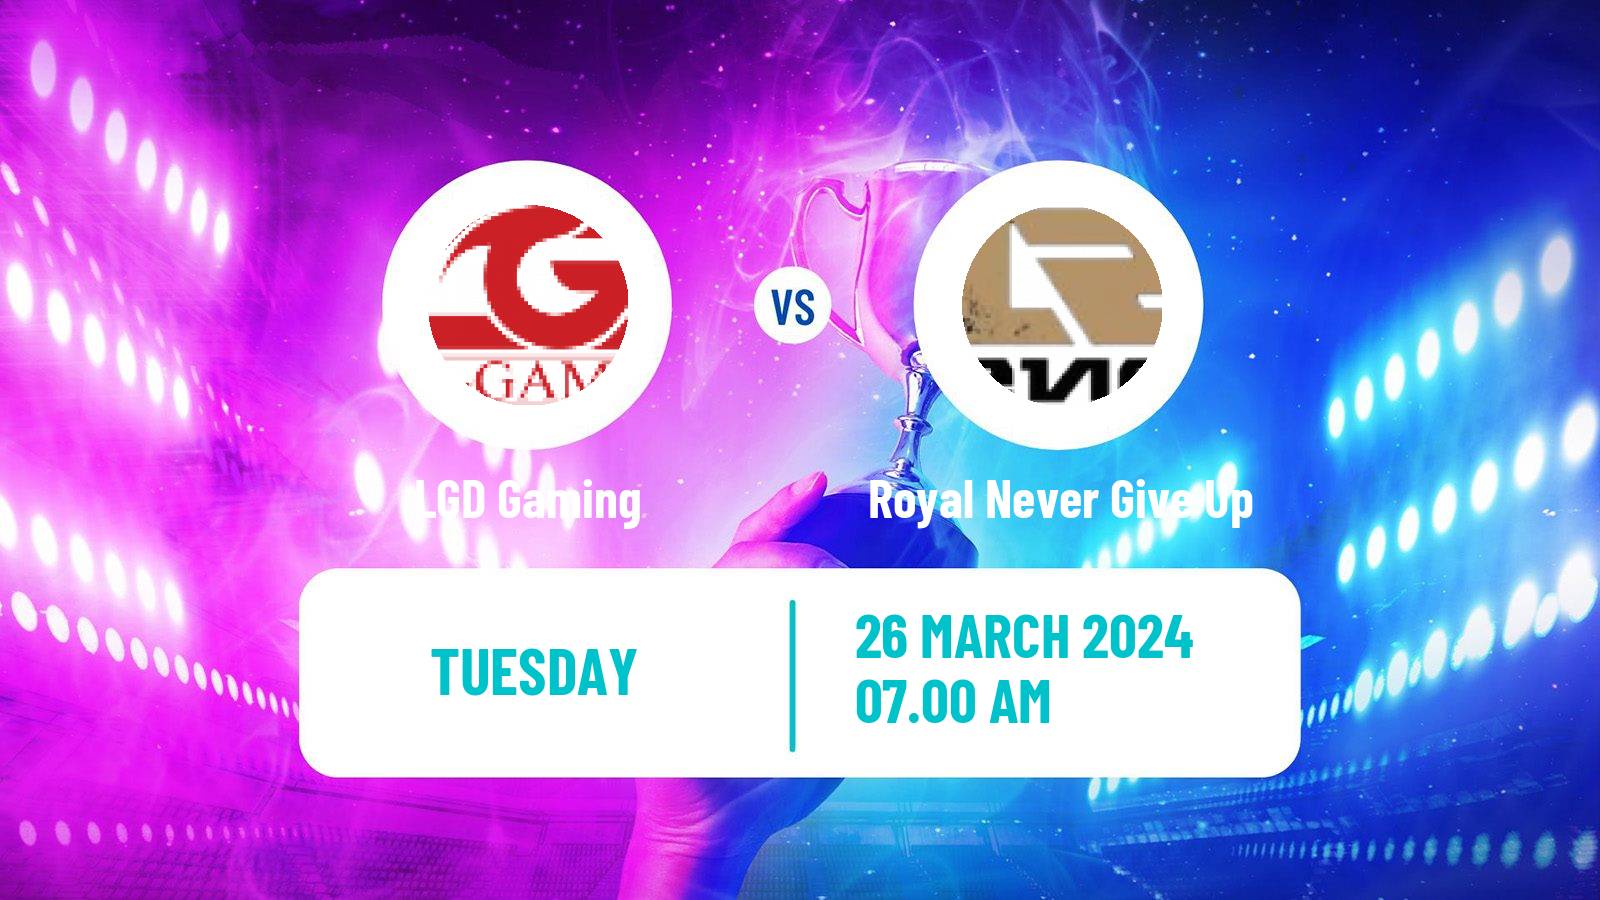 Esports League Of Legends Lpl LGD Gaming - Royal Never Give Up